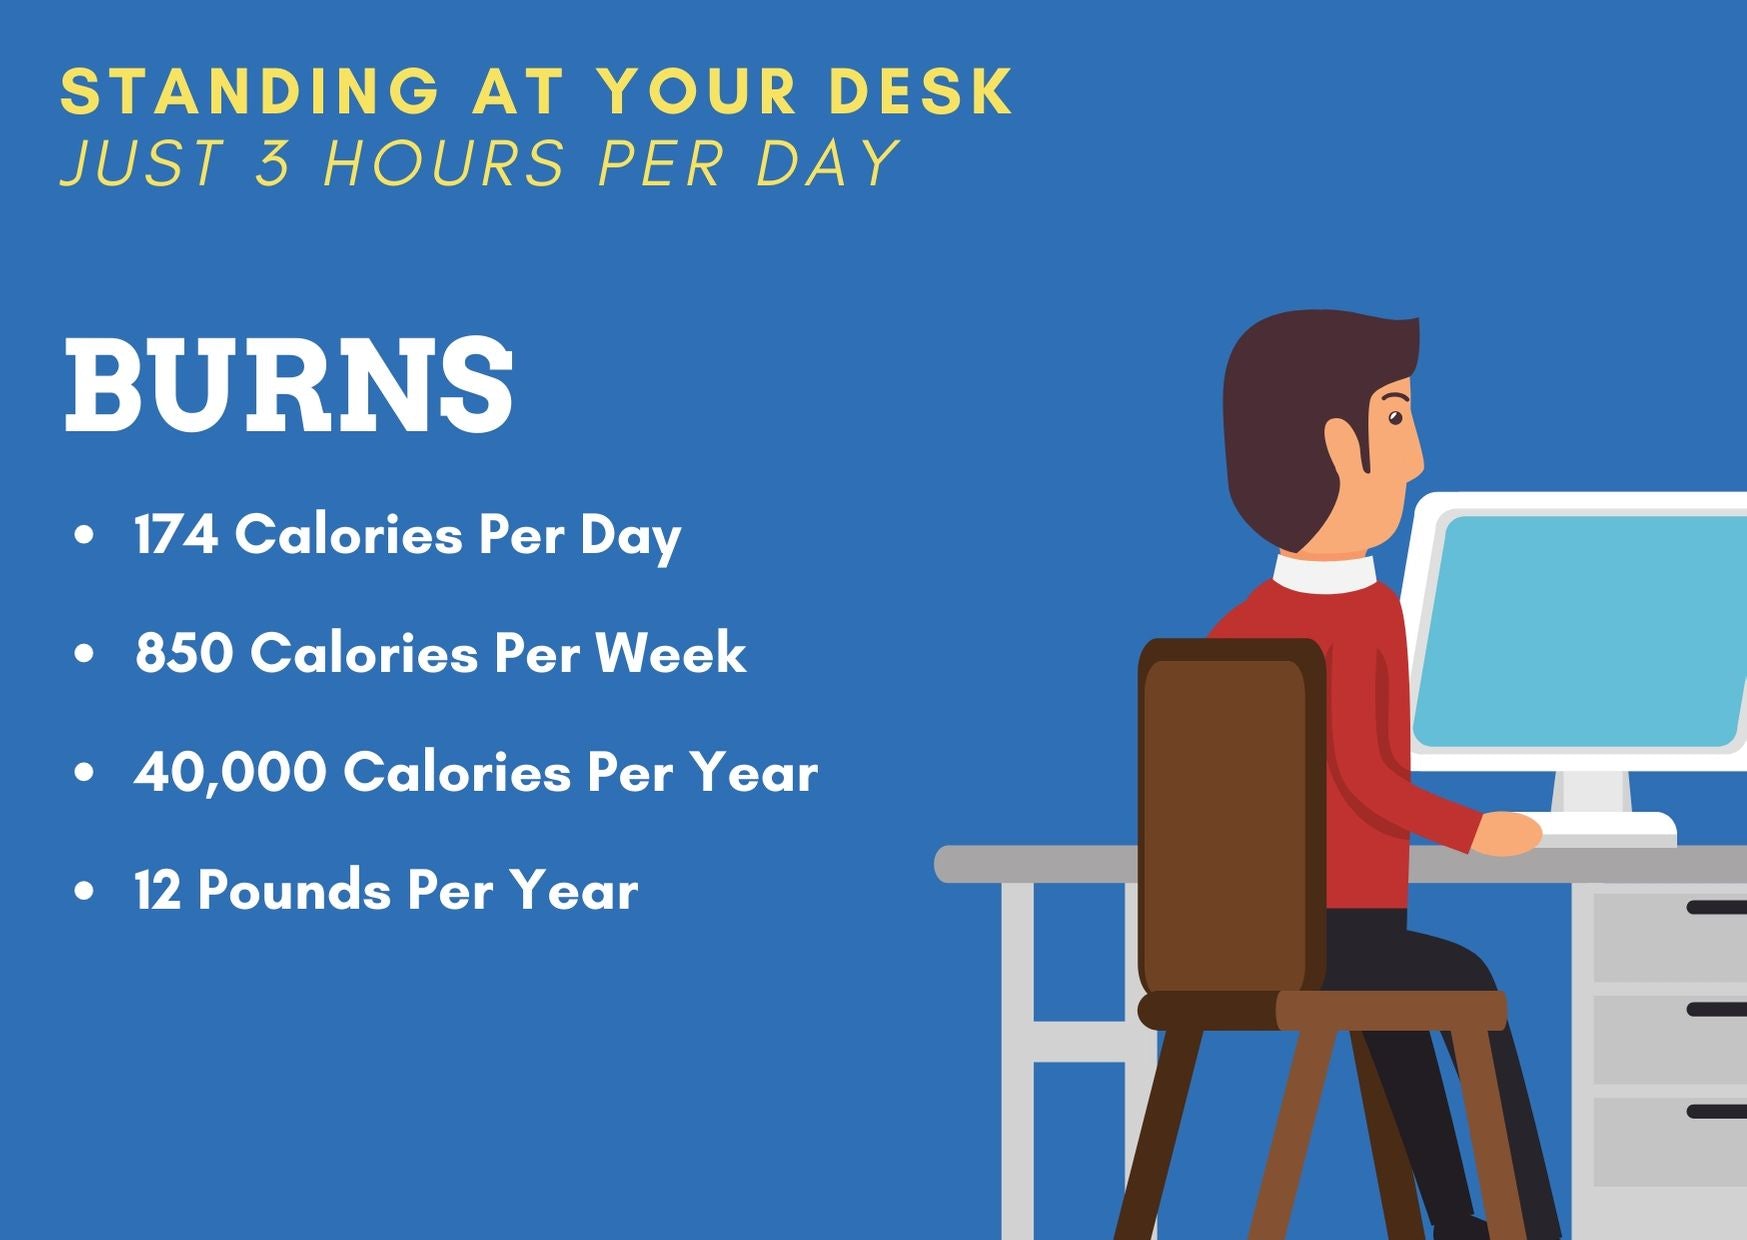 Health And Performance Benefits Of Using A Standing Desk